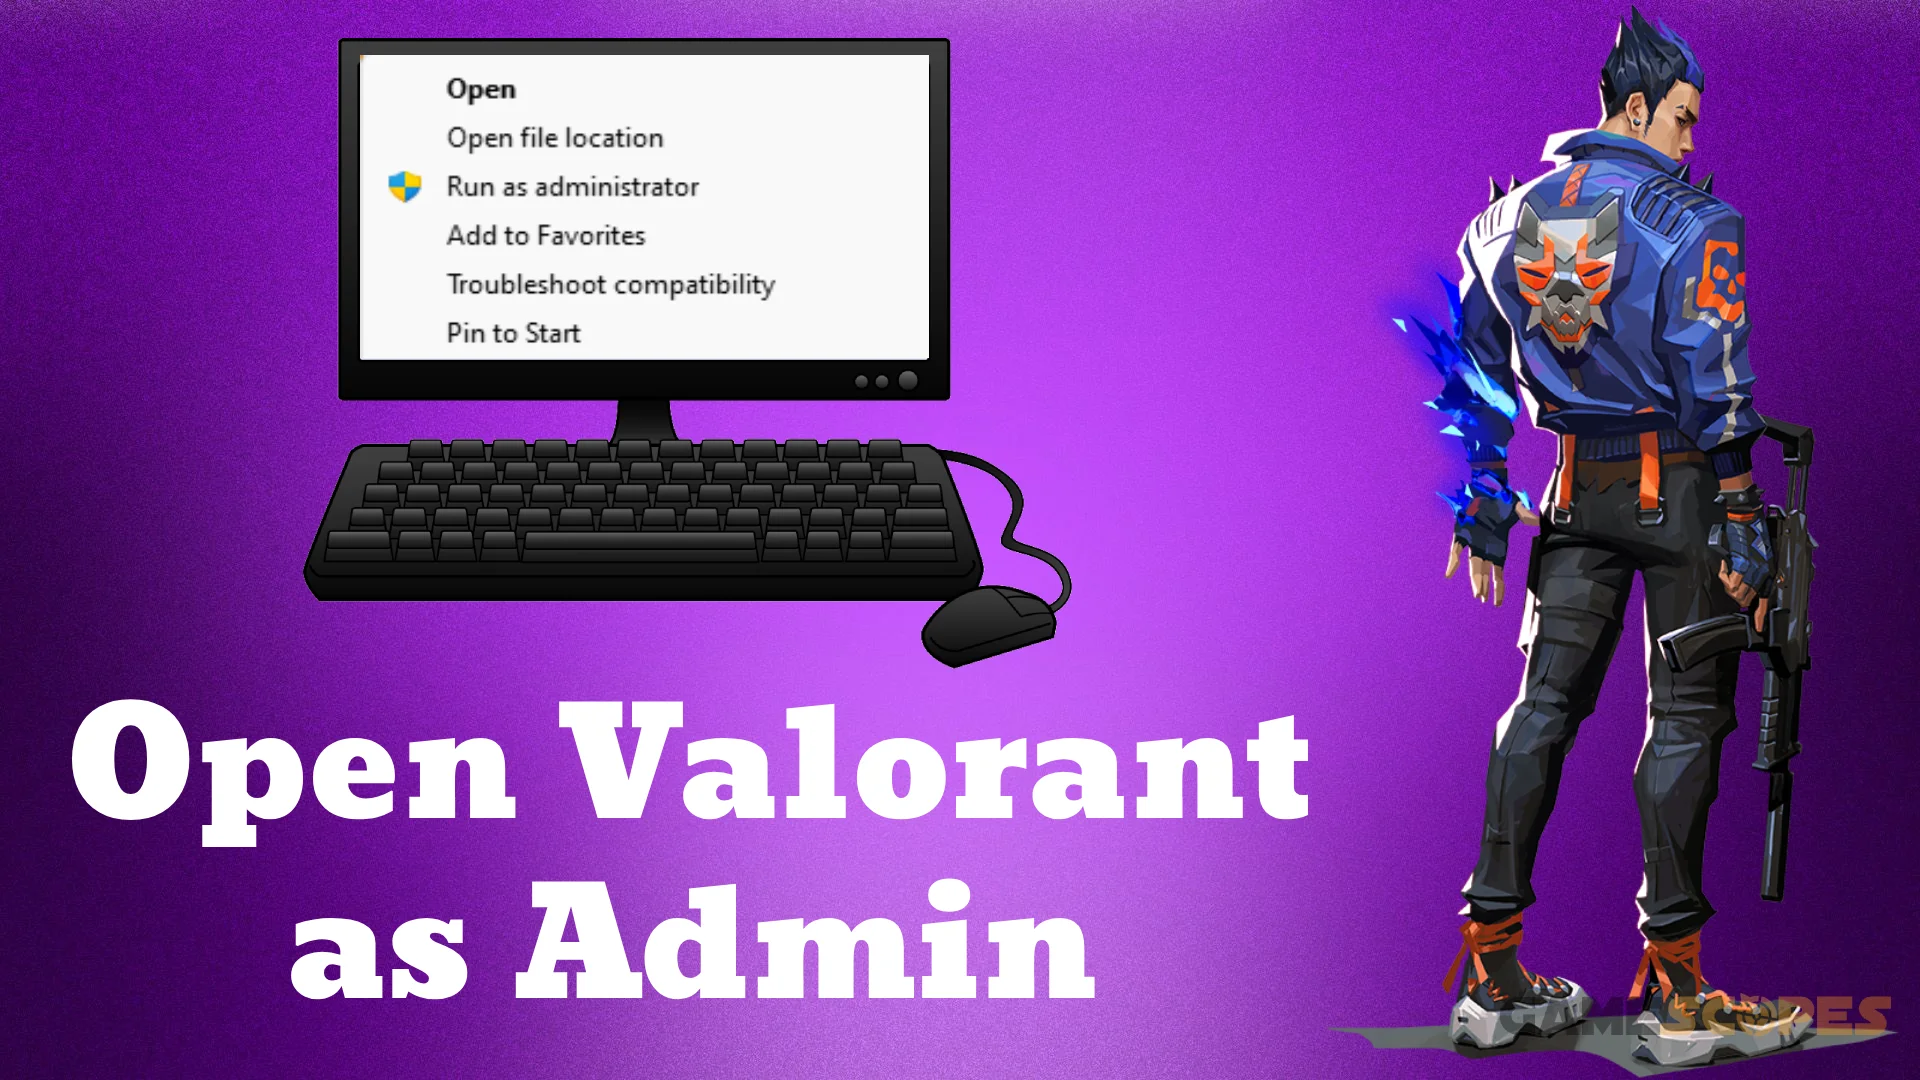 When Valorant keeps crashing on startup, you must run the game as administrator.